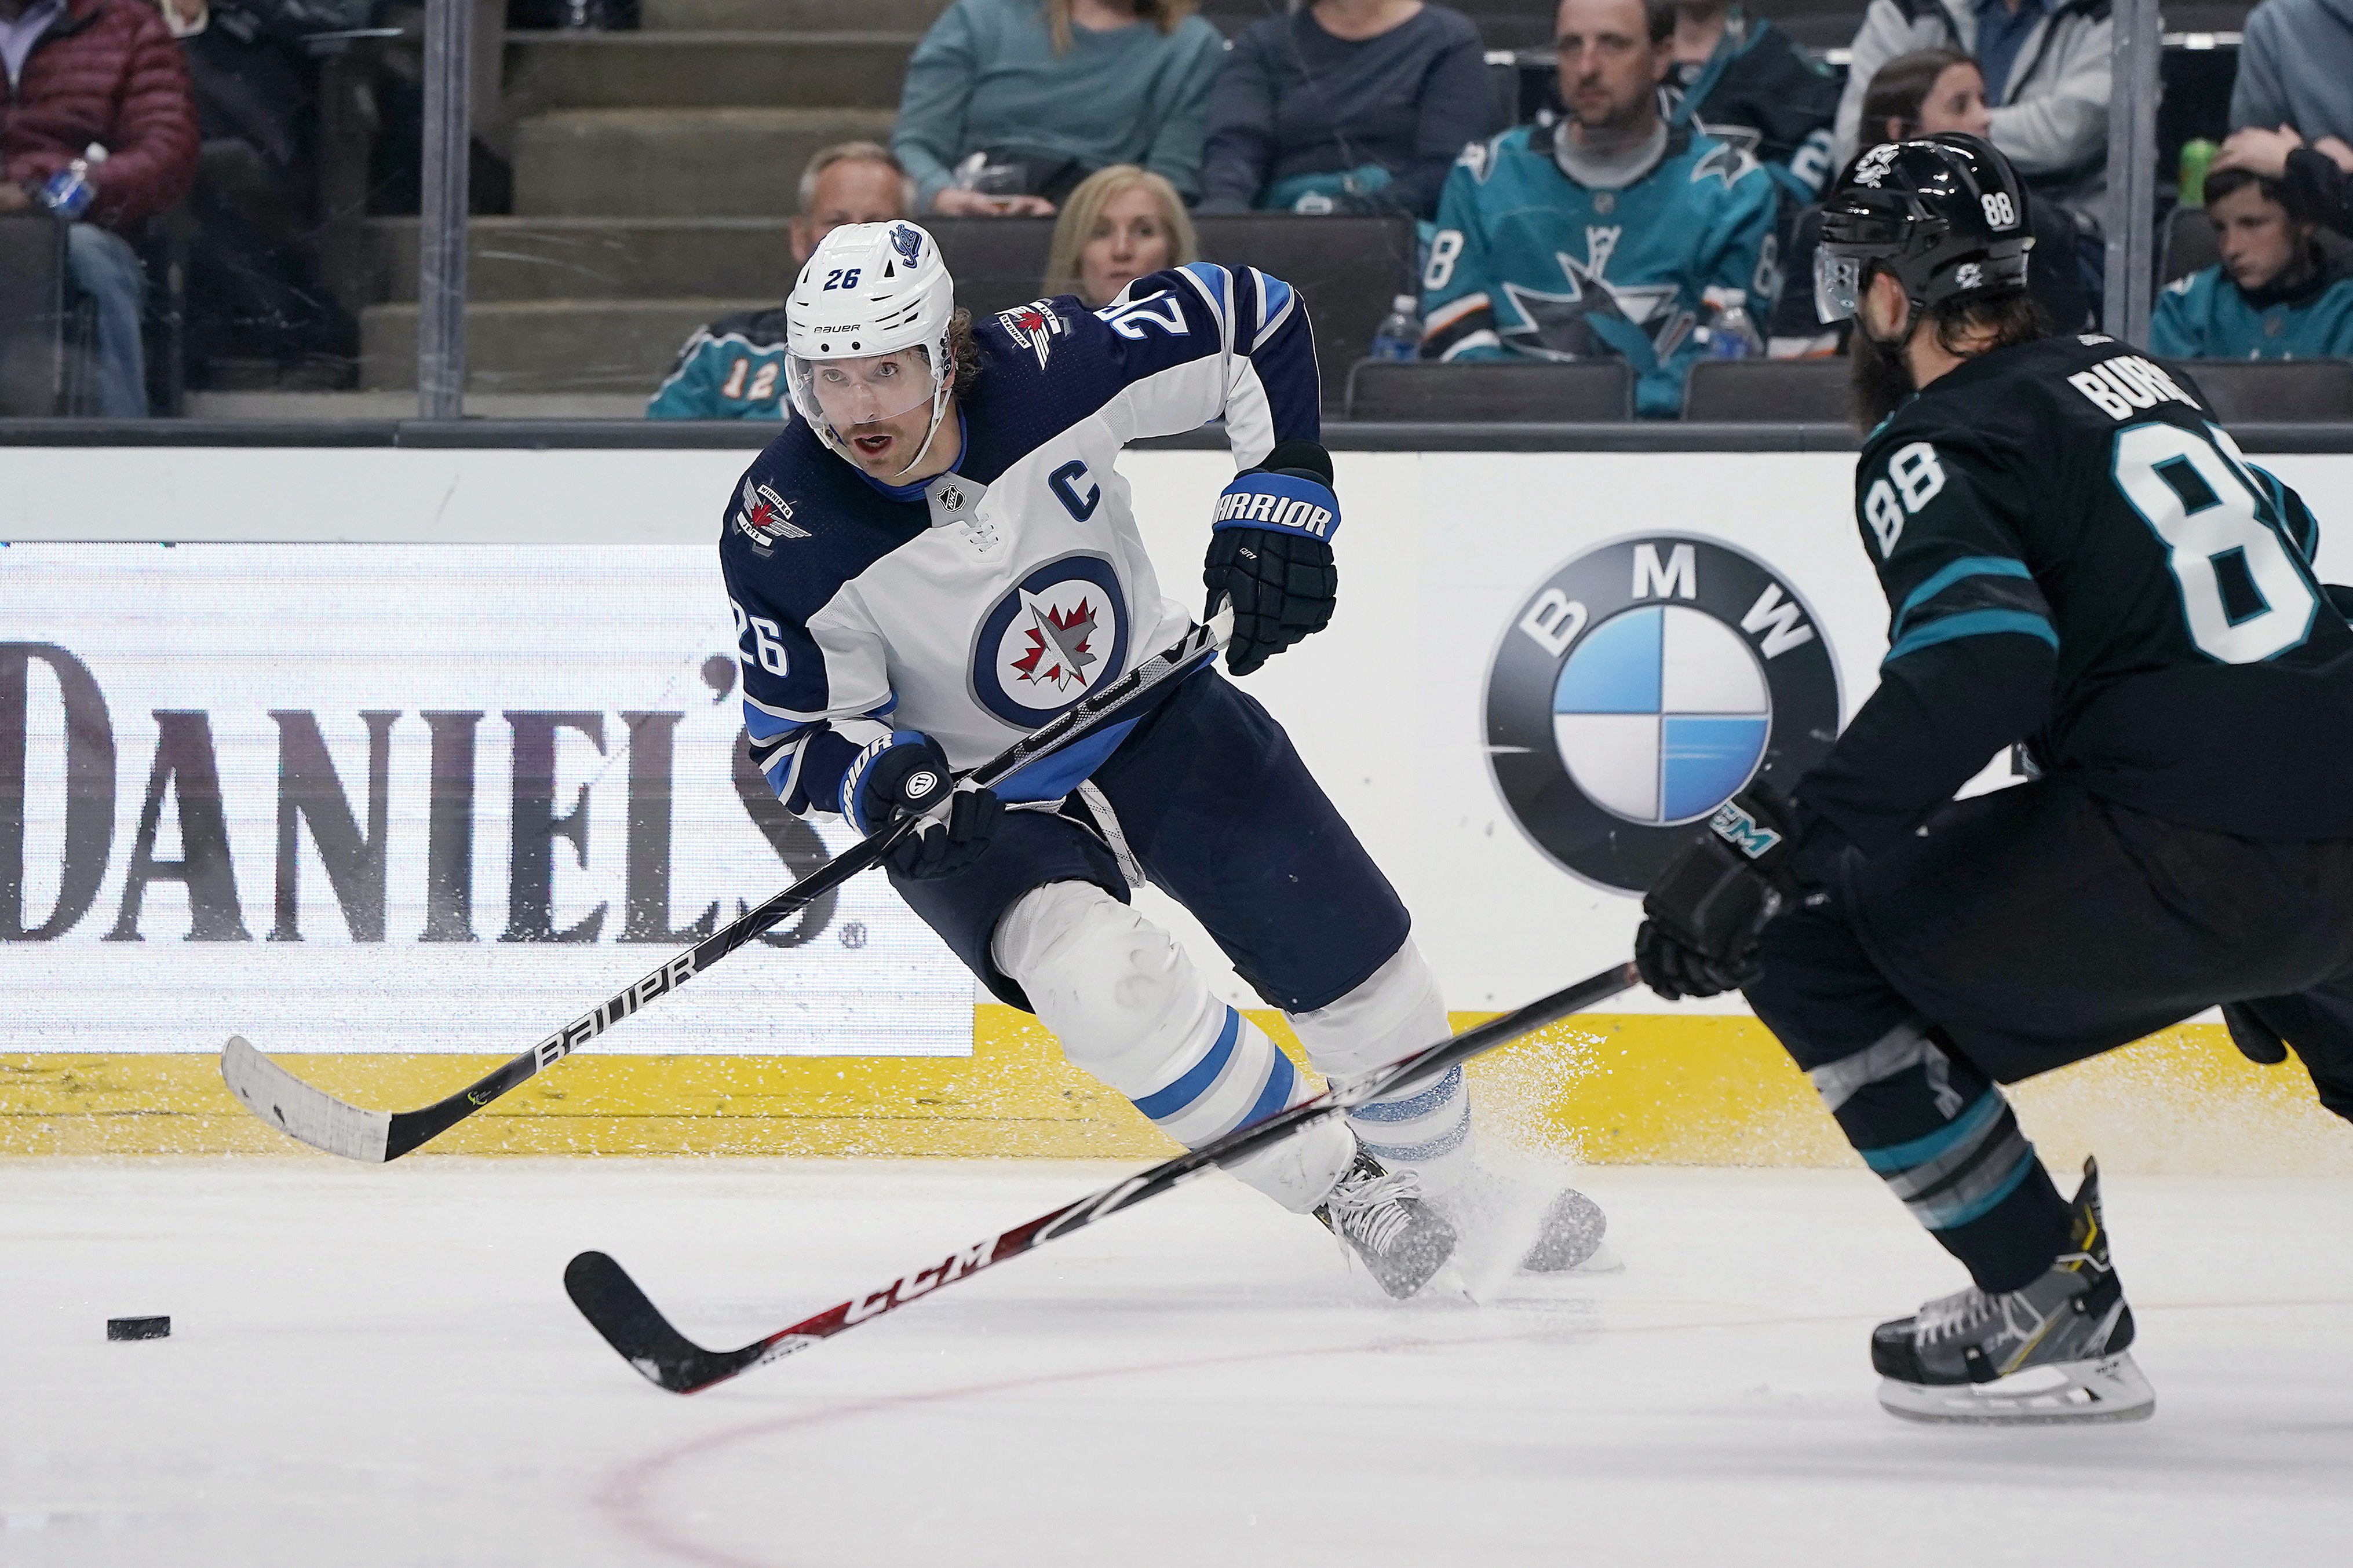 Blake Wheeler To Be Out For A While